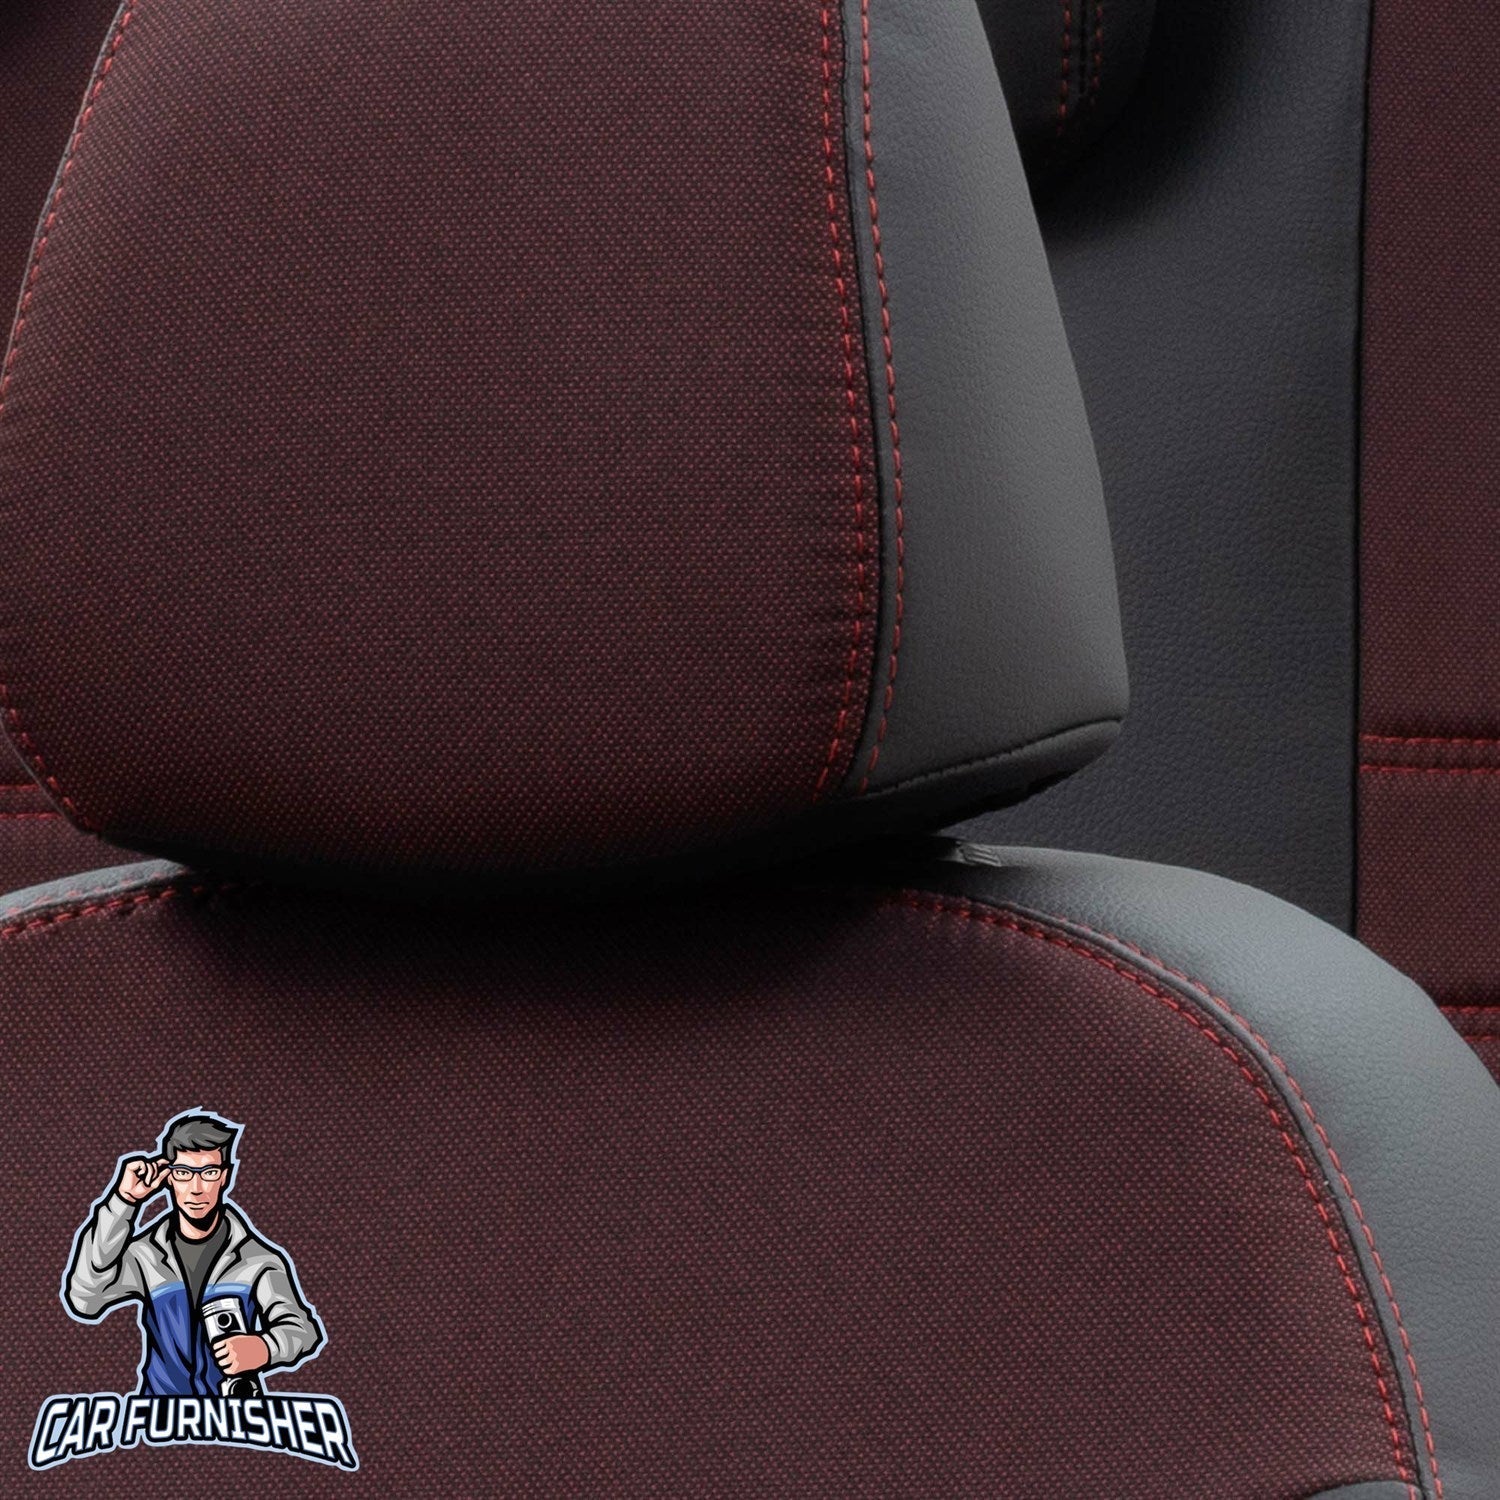 Renault Taliant Seat Covers Paris Leather & Jacquard Design Red Leather & Jacquard Fabric